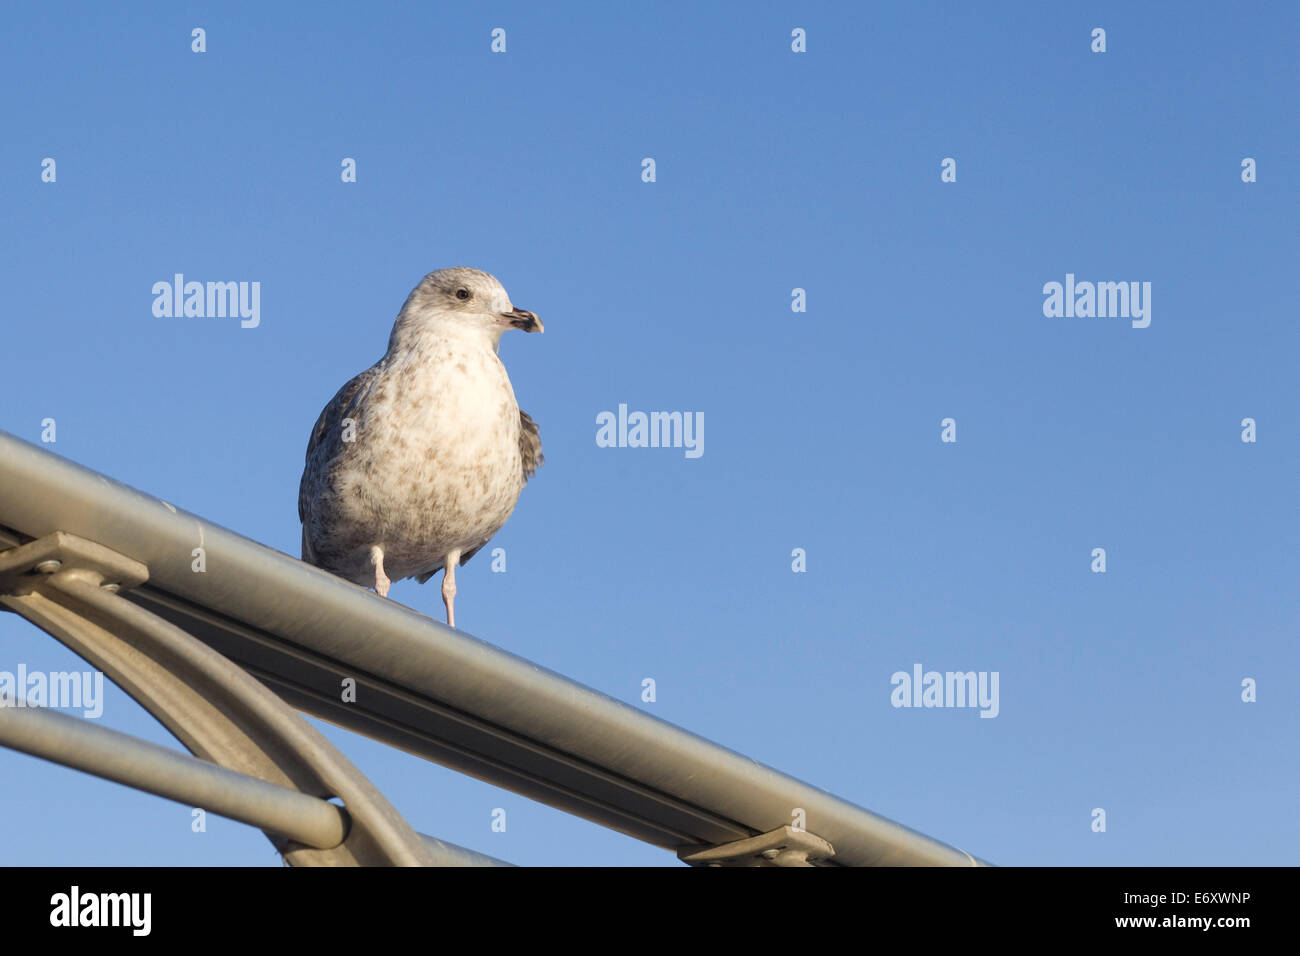 Seagull on a pole with a blue sky Larus canus Stock Photo